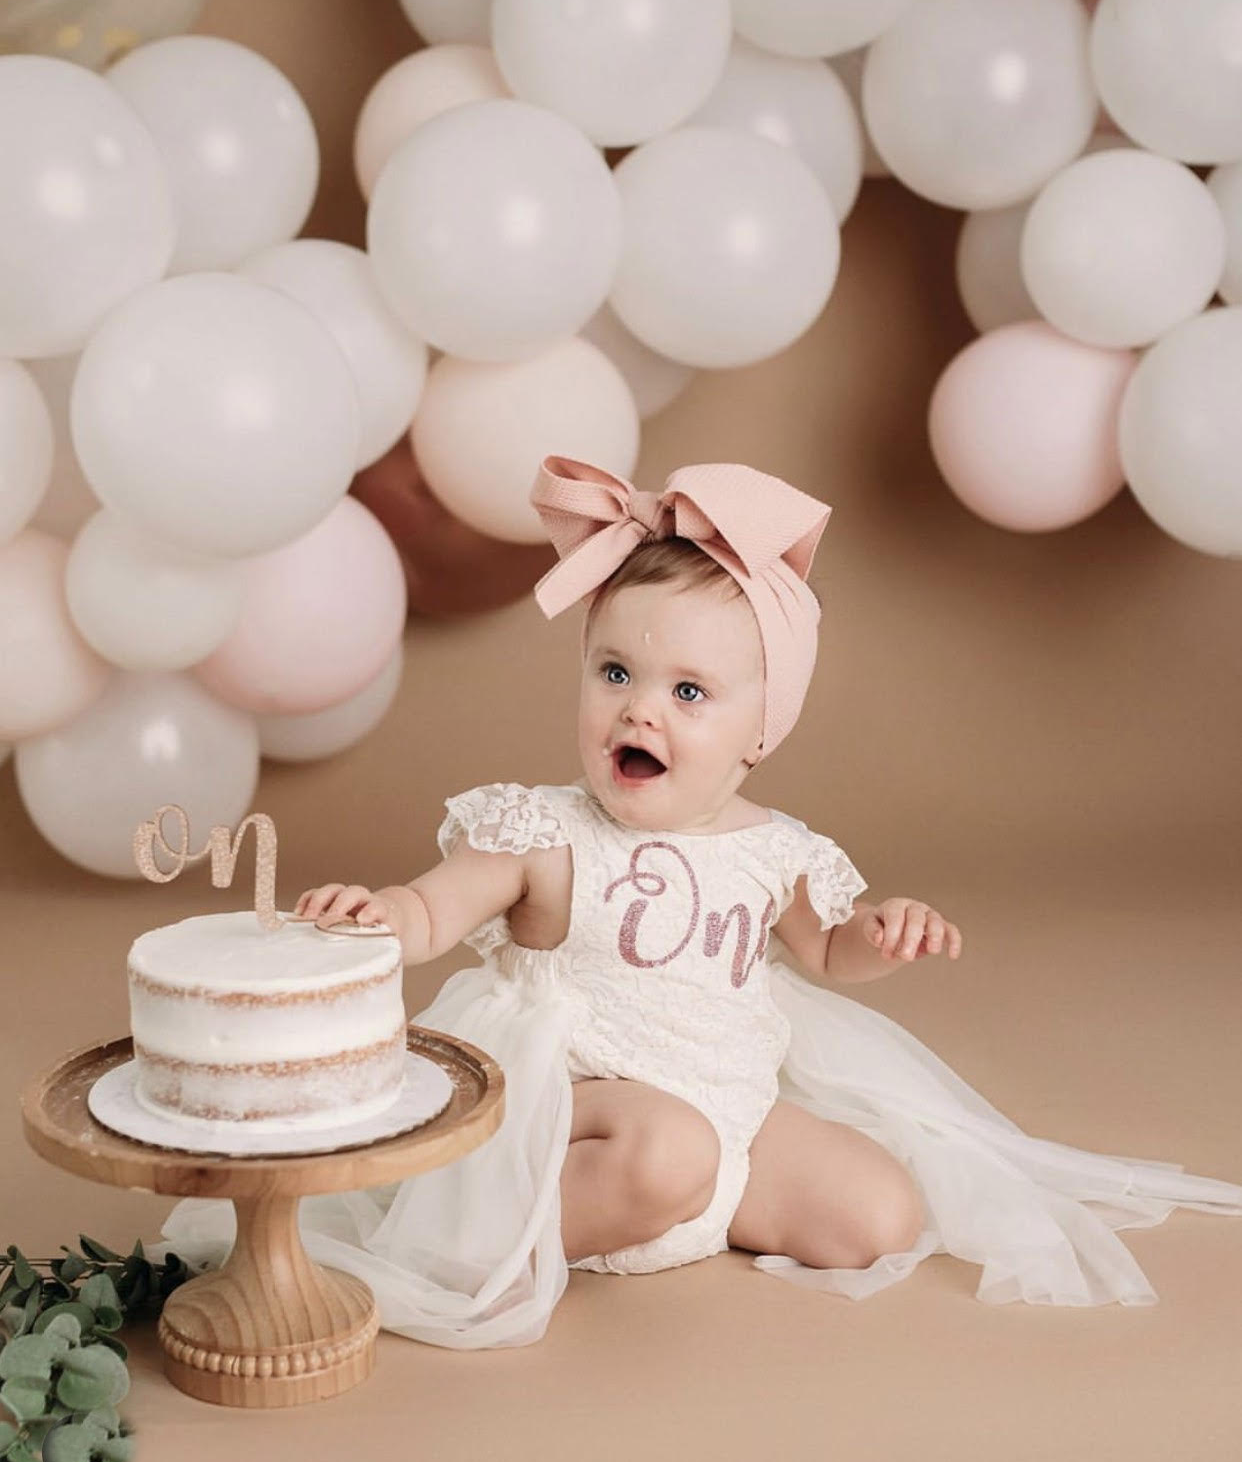 Portrait of Cute Adorable Caucasian Baby Girl with Blue Eyes in Pink Tutu  Skirt Celebrating Her First Birthday with Gourmet Cake Stock Image - Image  of cute, holiday: 72027237